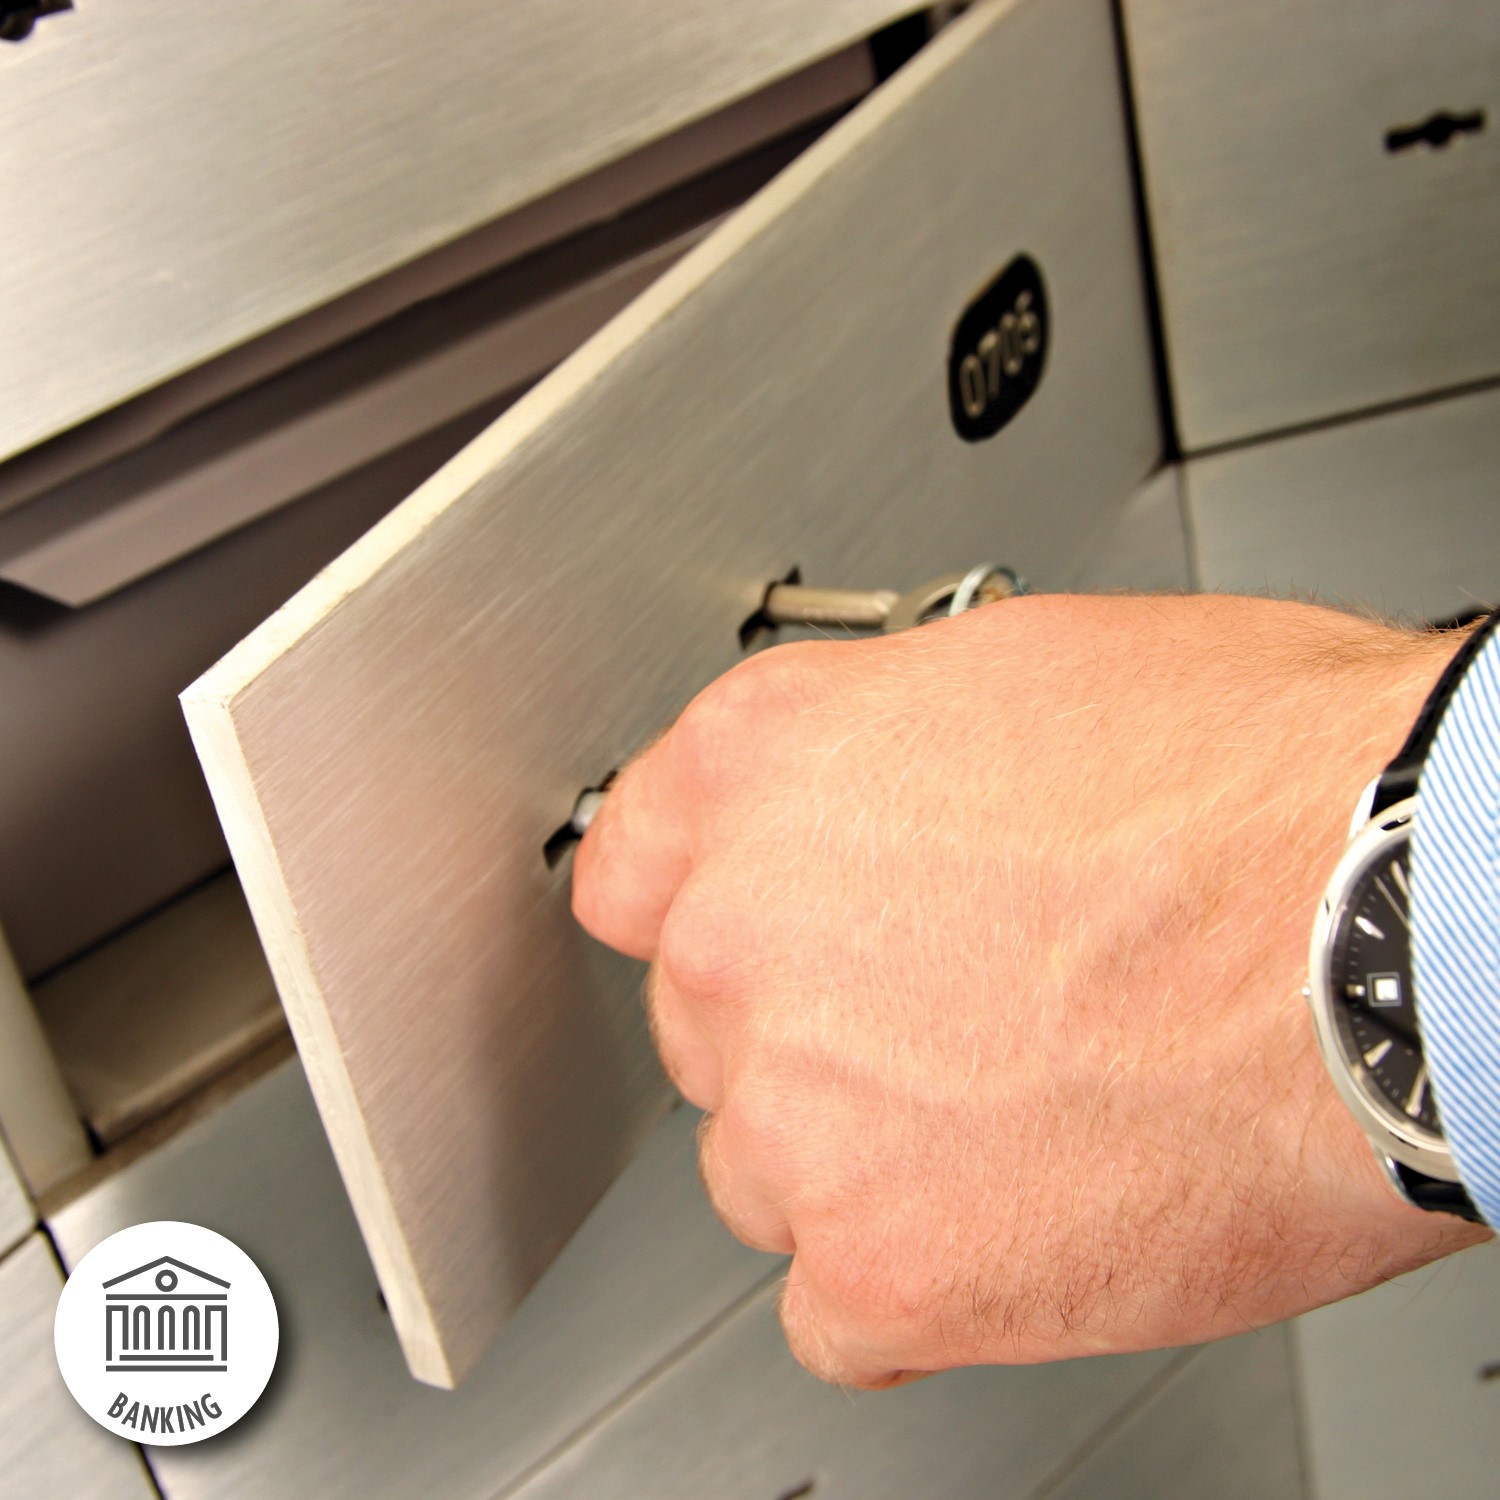 All You Need to Know About Safe Deposit Boxes